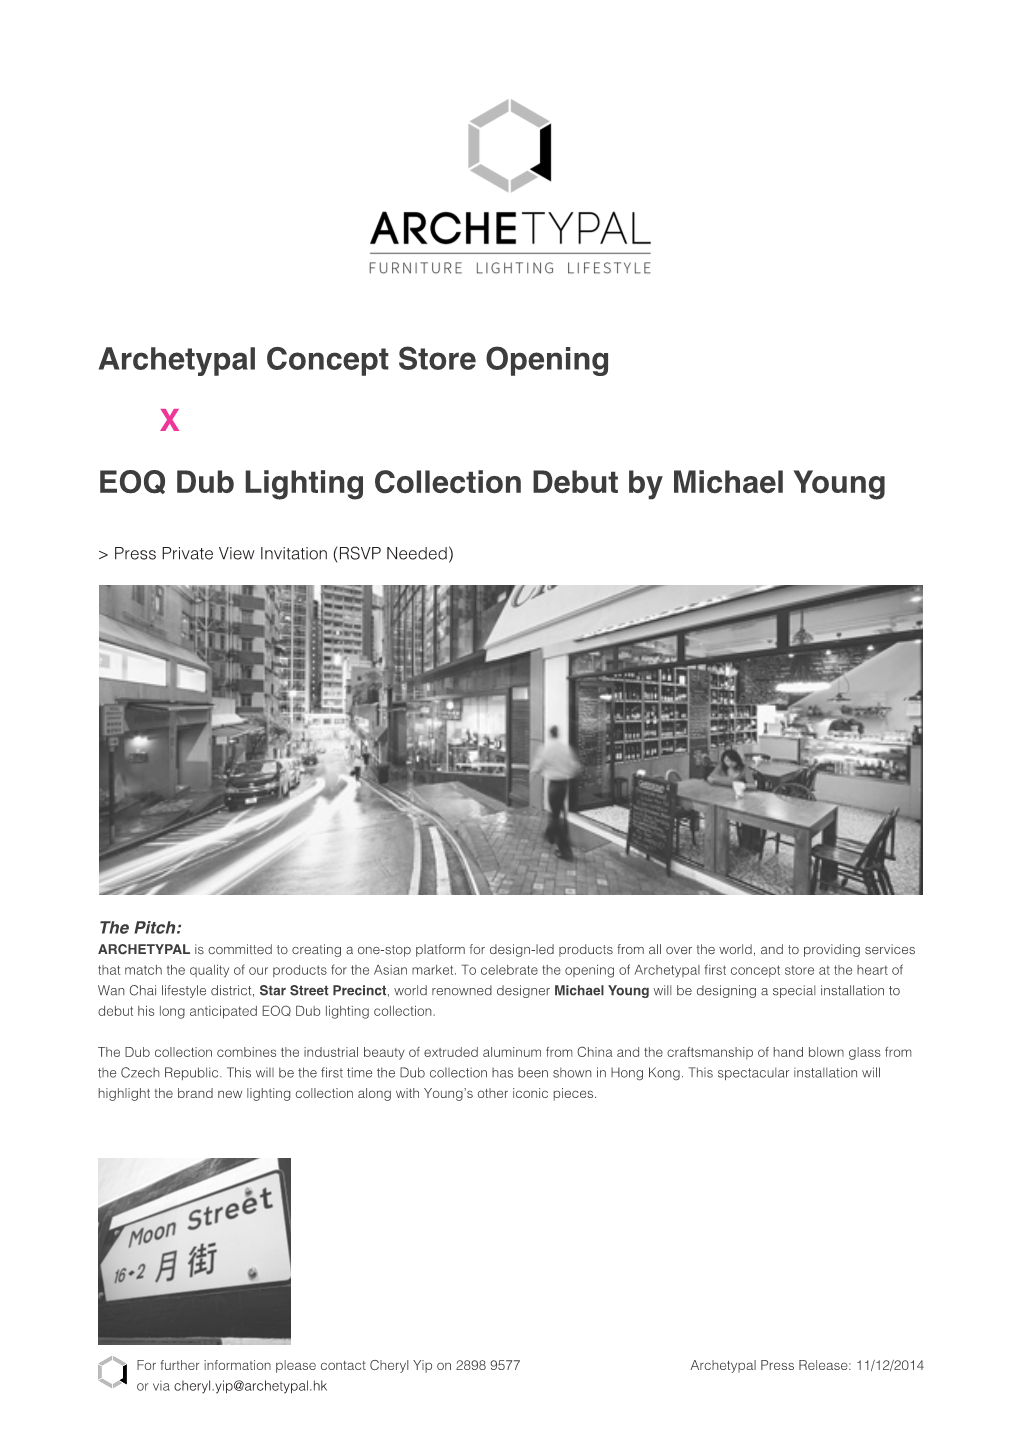 Archetypal Concept Store Opening X EOQ Dub Lighting Collection Debut by Michael Young